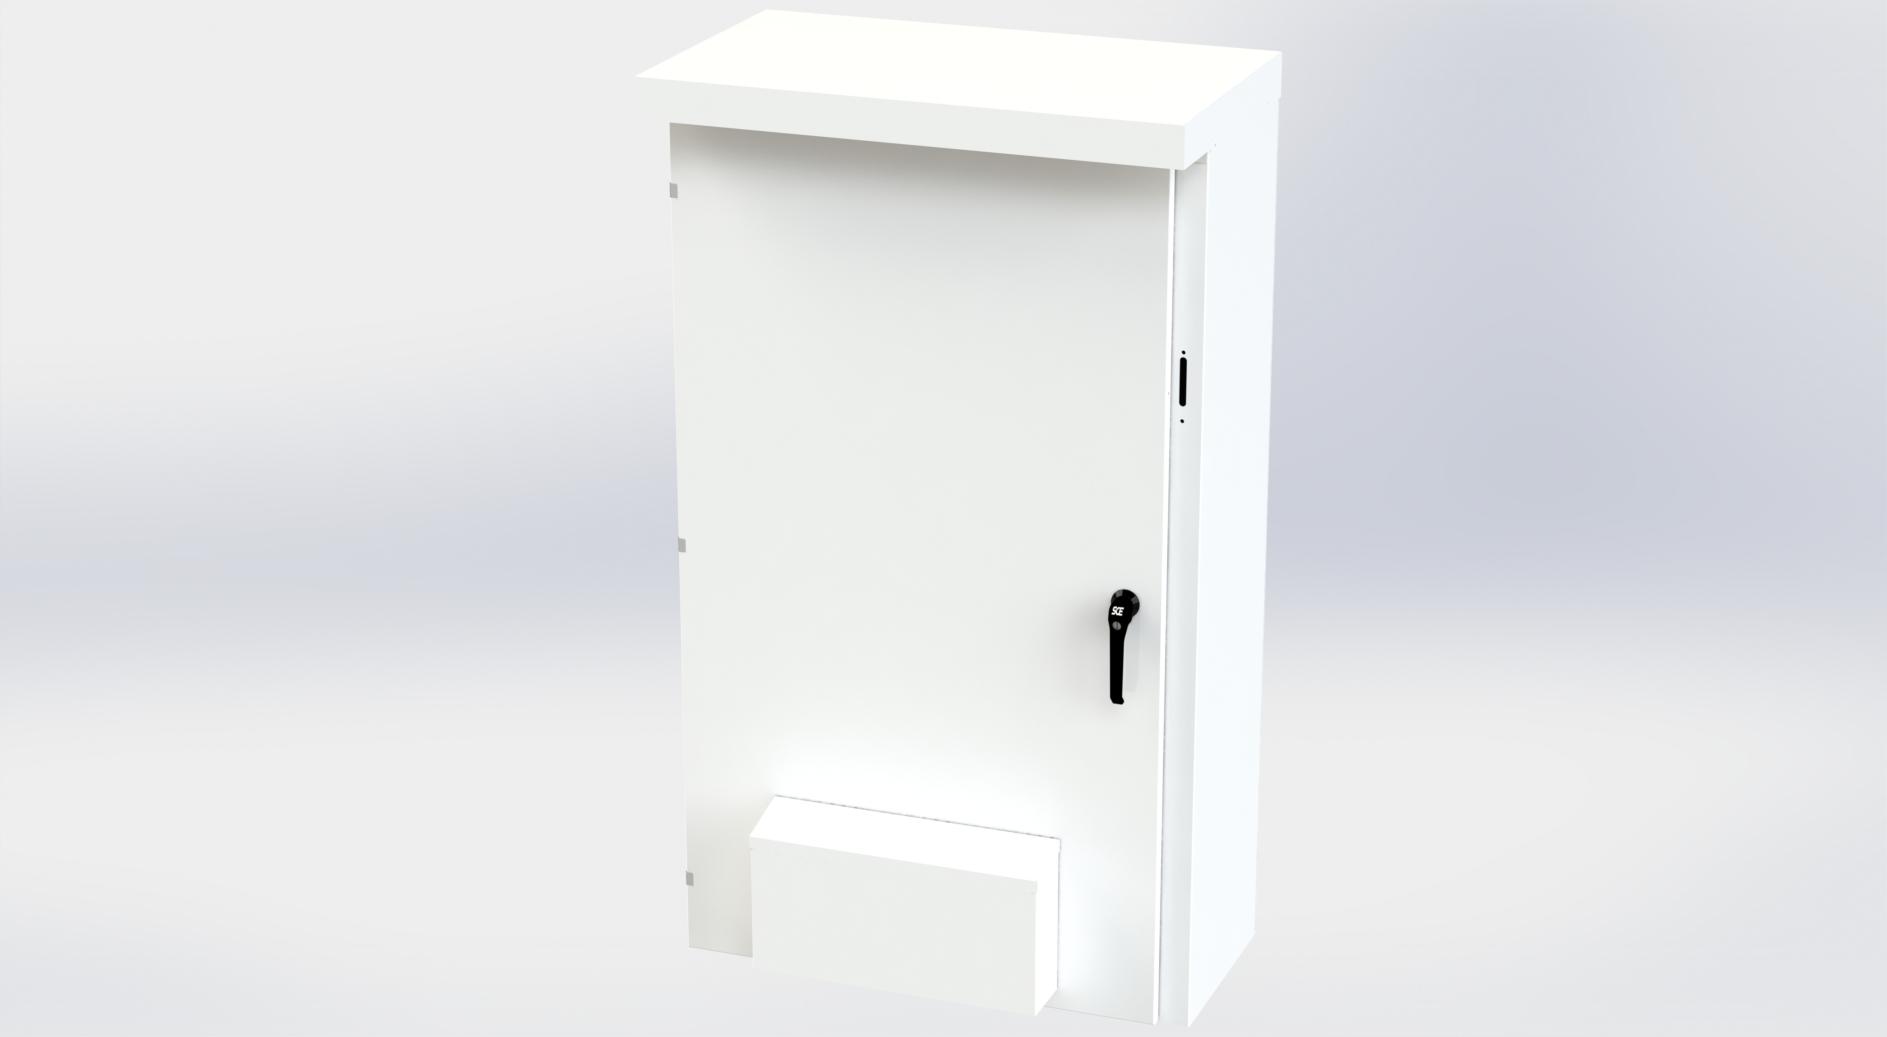 Saginaw Control SCE-65XVR3716 Enclosure, Vented Type 3R Disconnect, Height:65.00", Width:37.38", Depth:16.00", White powder coating inside and out. Optional sub-panels are powder coated white.